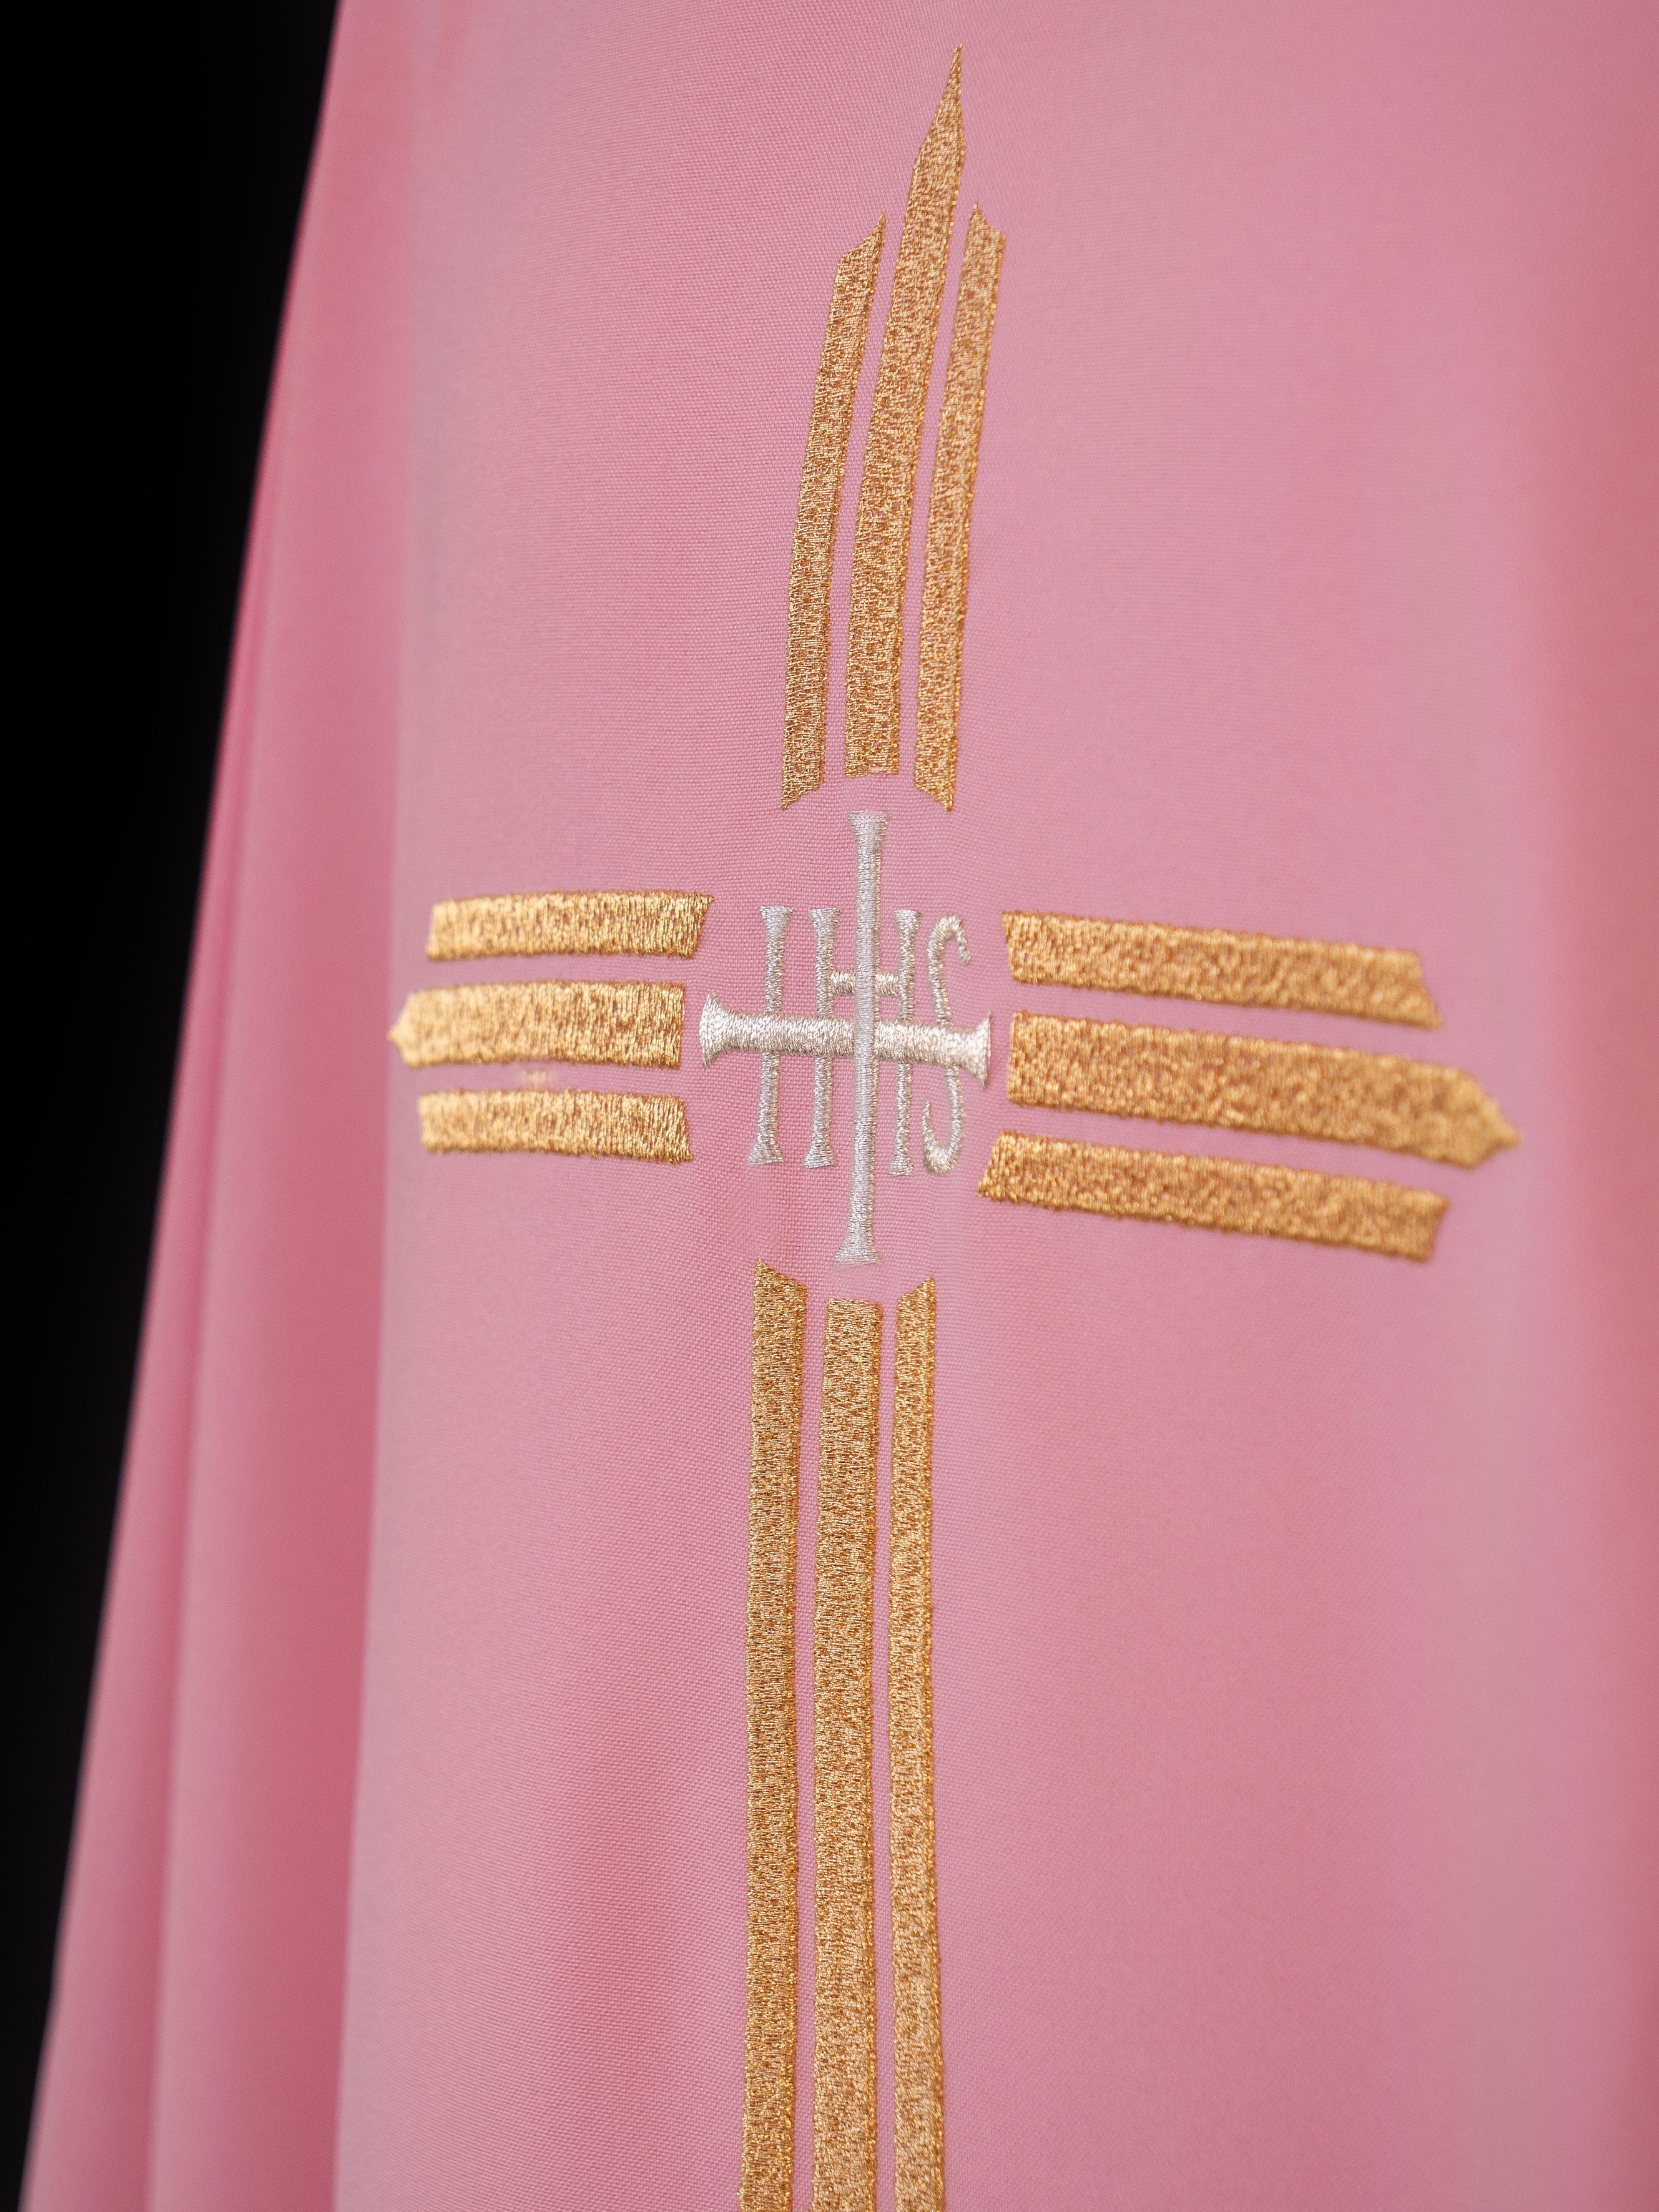 Pink chasuble with gold IHS embroidery